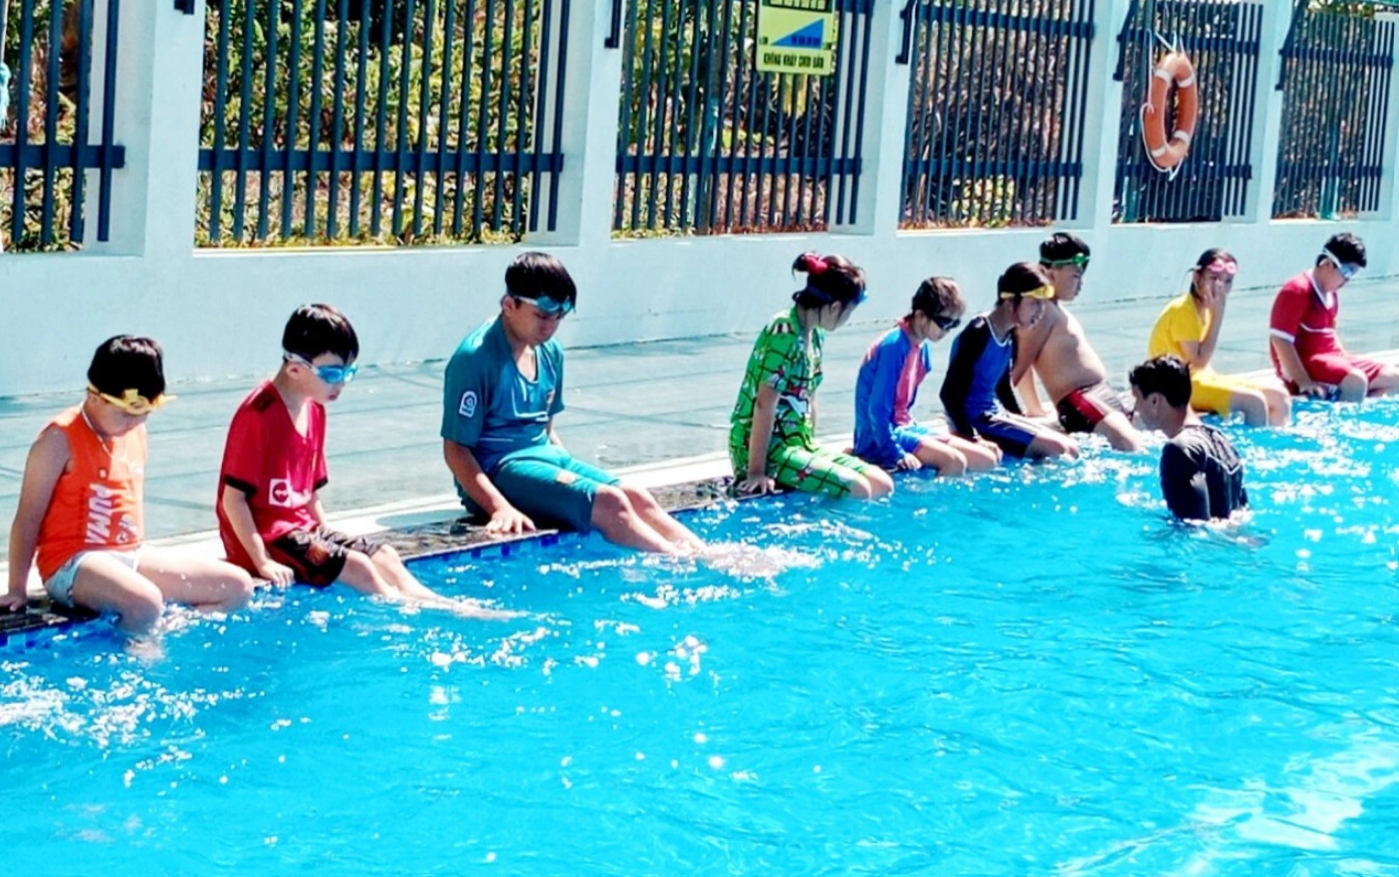 Kids are instructed how to access water before entering swimming lessons. Photo: N. Mai